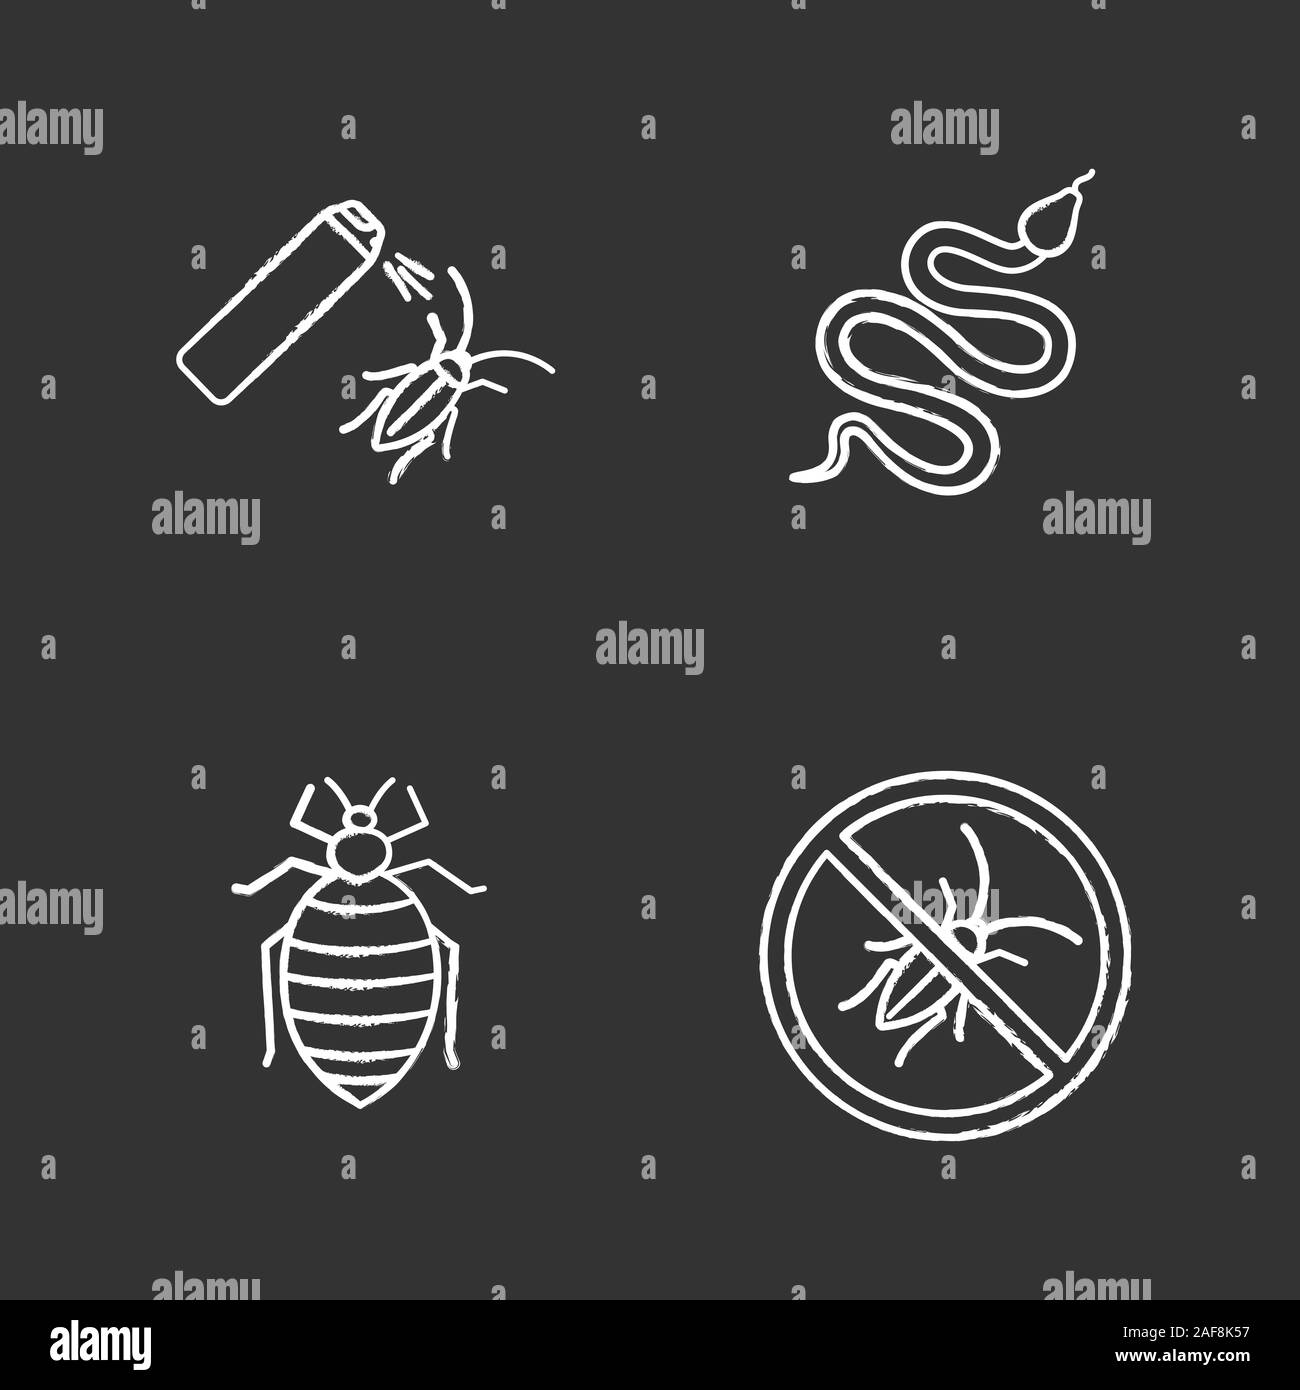 Pest control chalk icons set. Snake, bed bug, cockroach bait, stop roaches. Isolated vector chalkboard illustrations Stock Vector